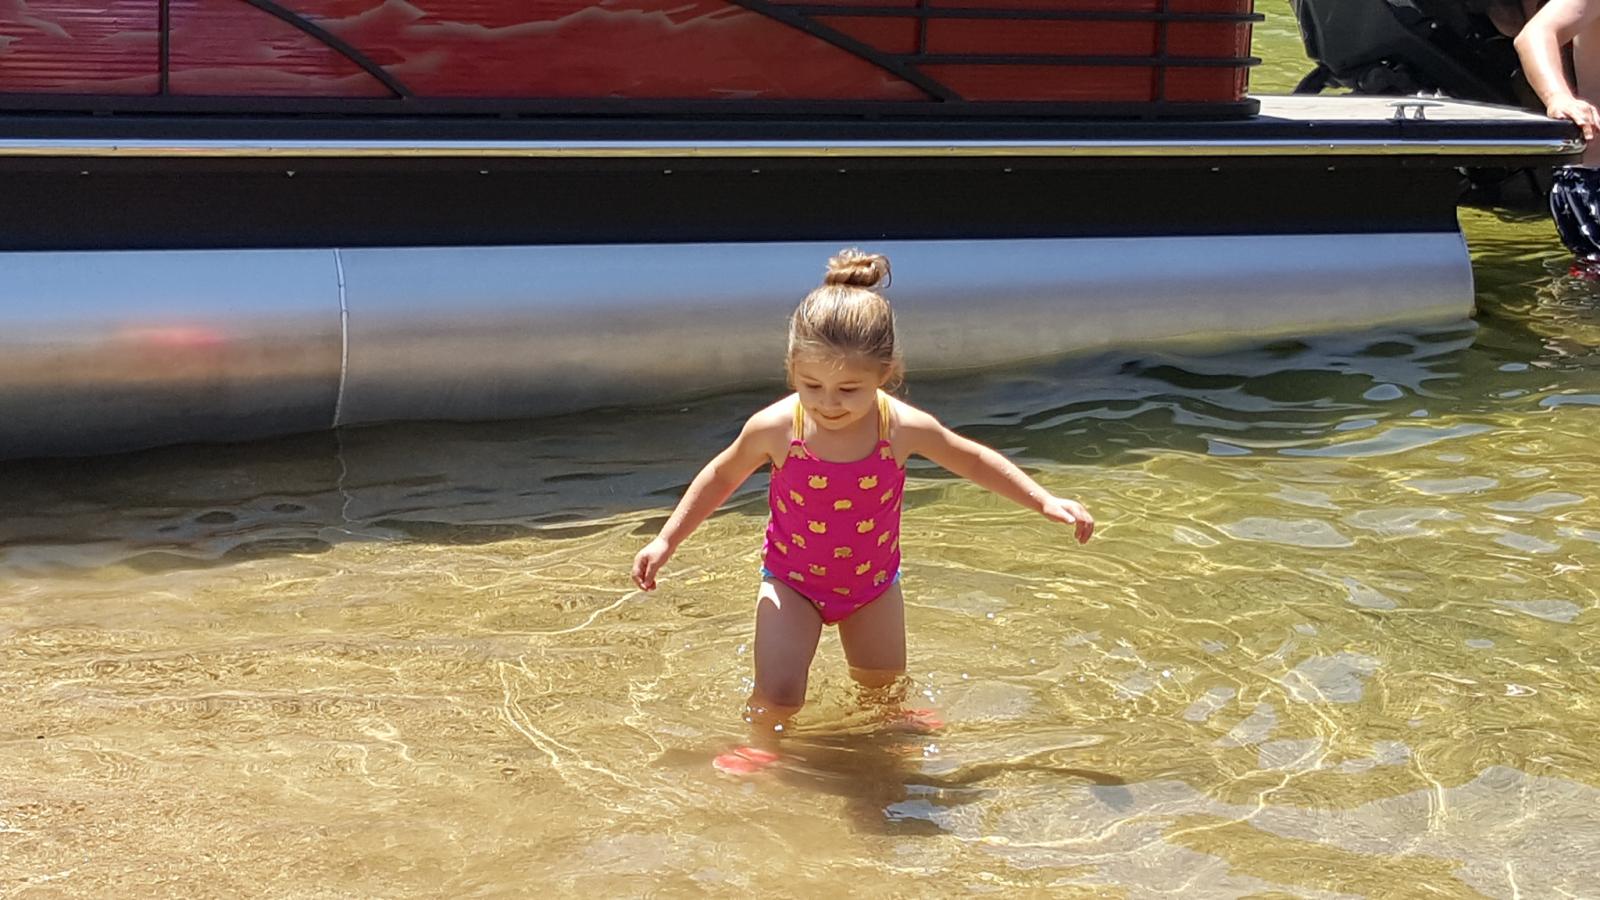 My little girl enjoying some time at the sand bar